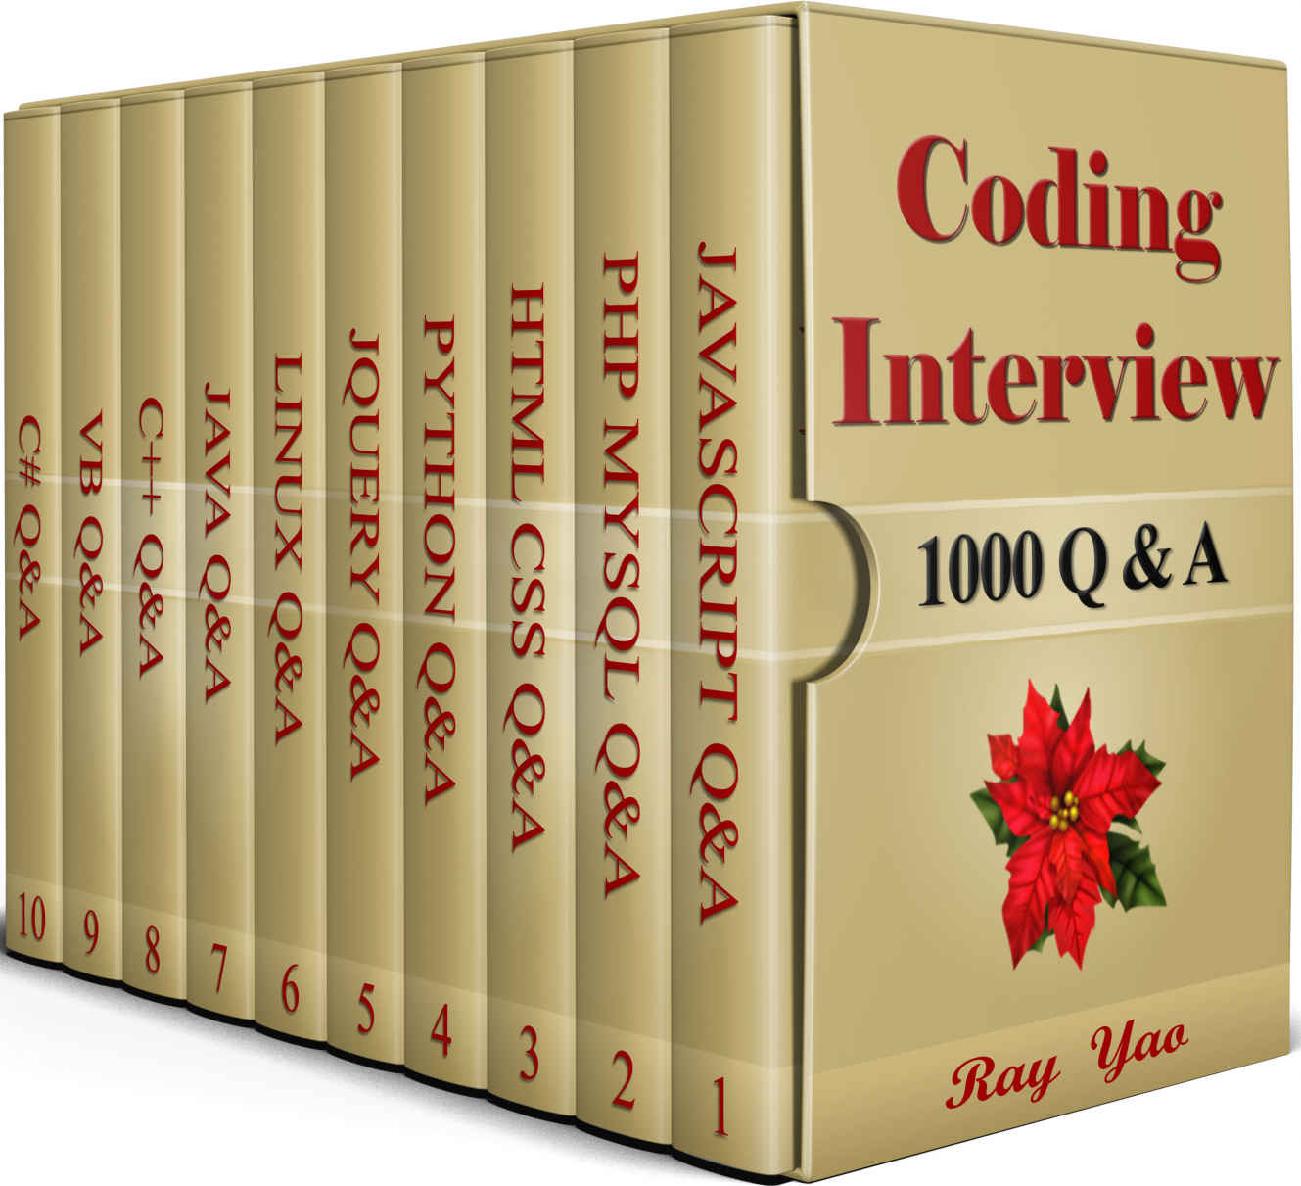 Coding Interview, 1000 Questions & Answers: Including Examination of C#, C++, HTML, CSS, JQuery, JavaScript, JAVA, Linux, PHP, MySQL, Python, Visual Basic Courses